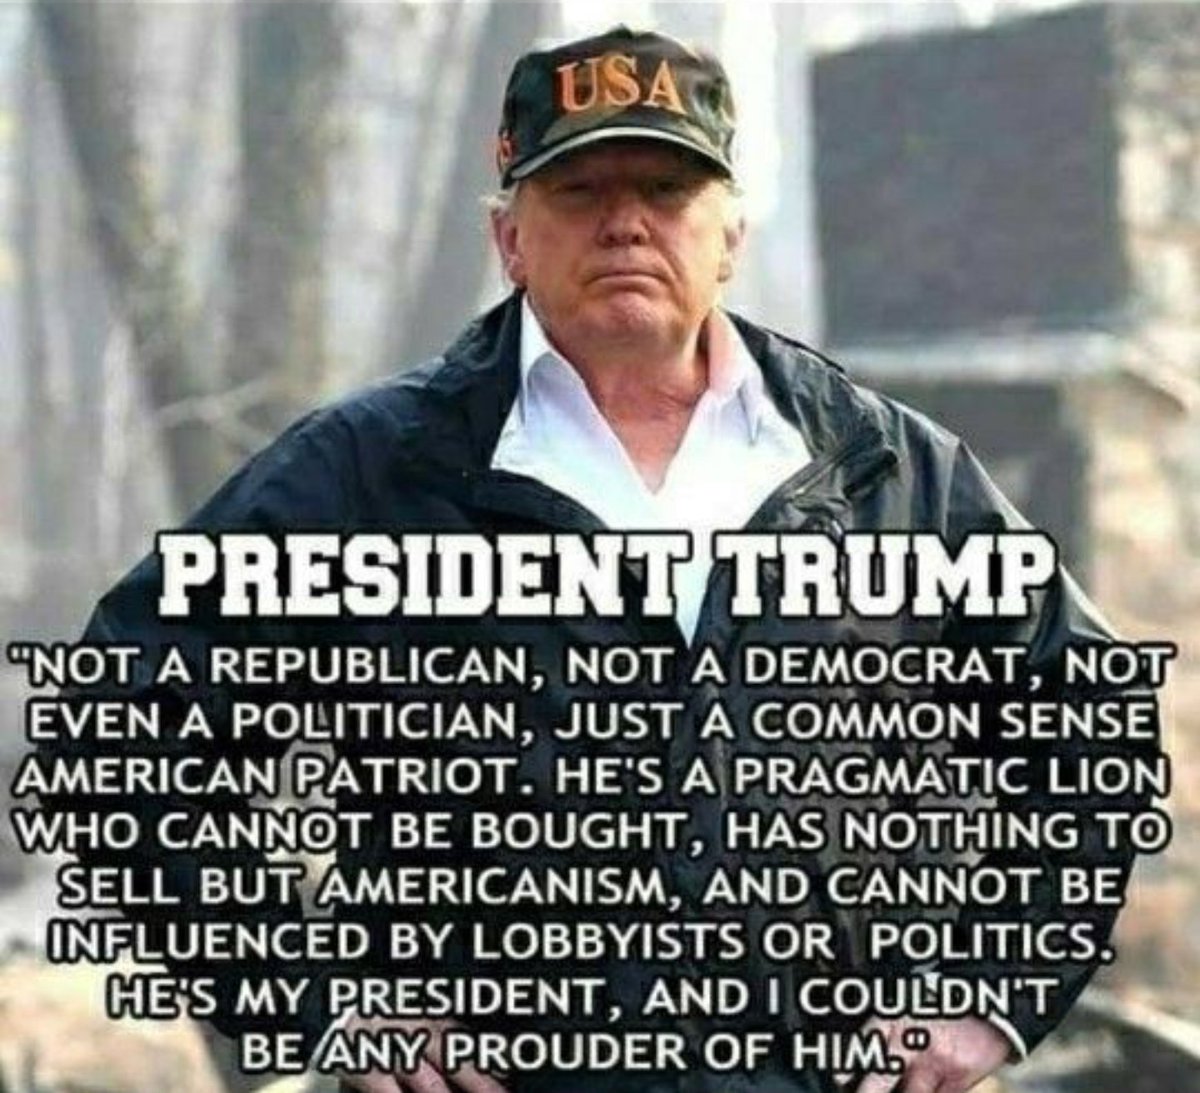 'The establishment protected itself, but not the citizens of our country. Their victories have not been your victories. Their triumphs have not been your triumphs'
~President Donald J. Trump